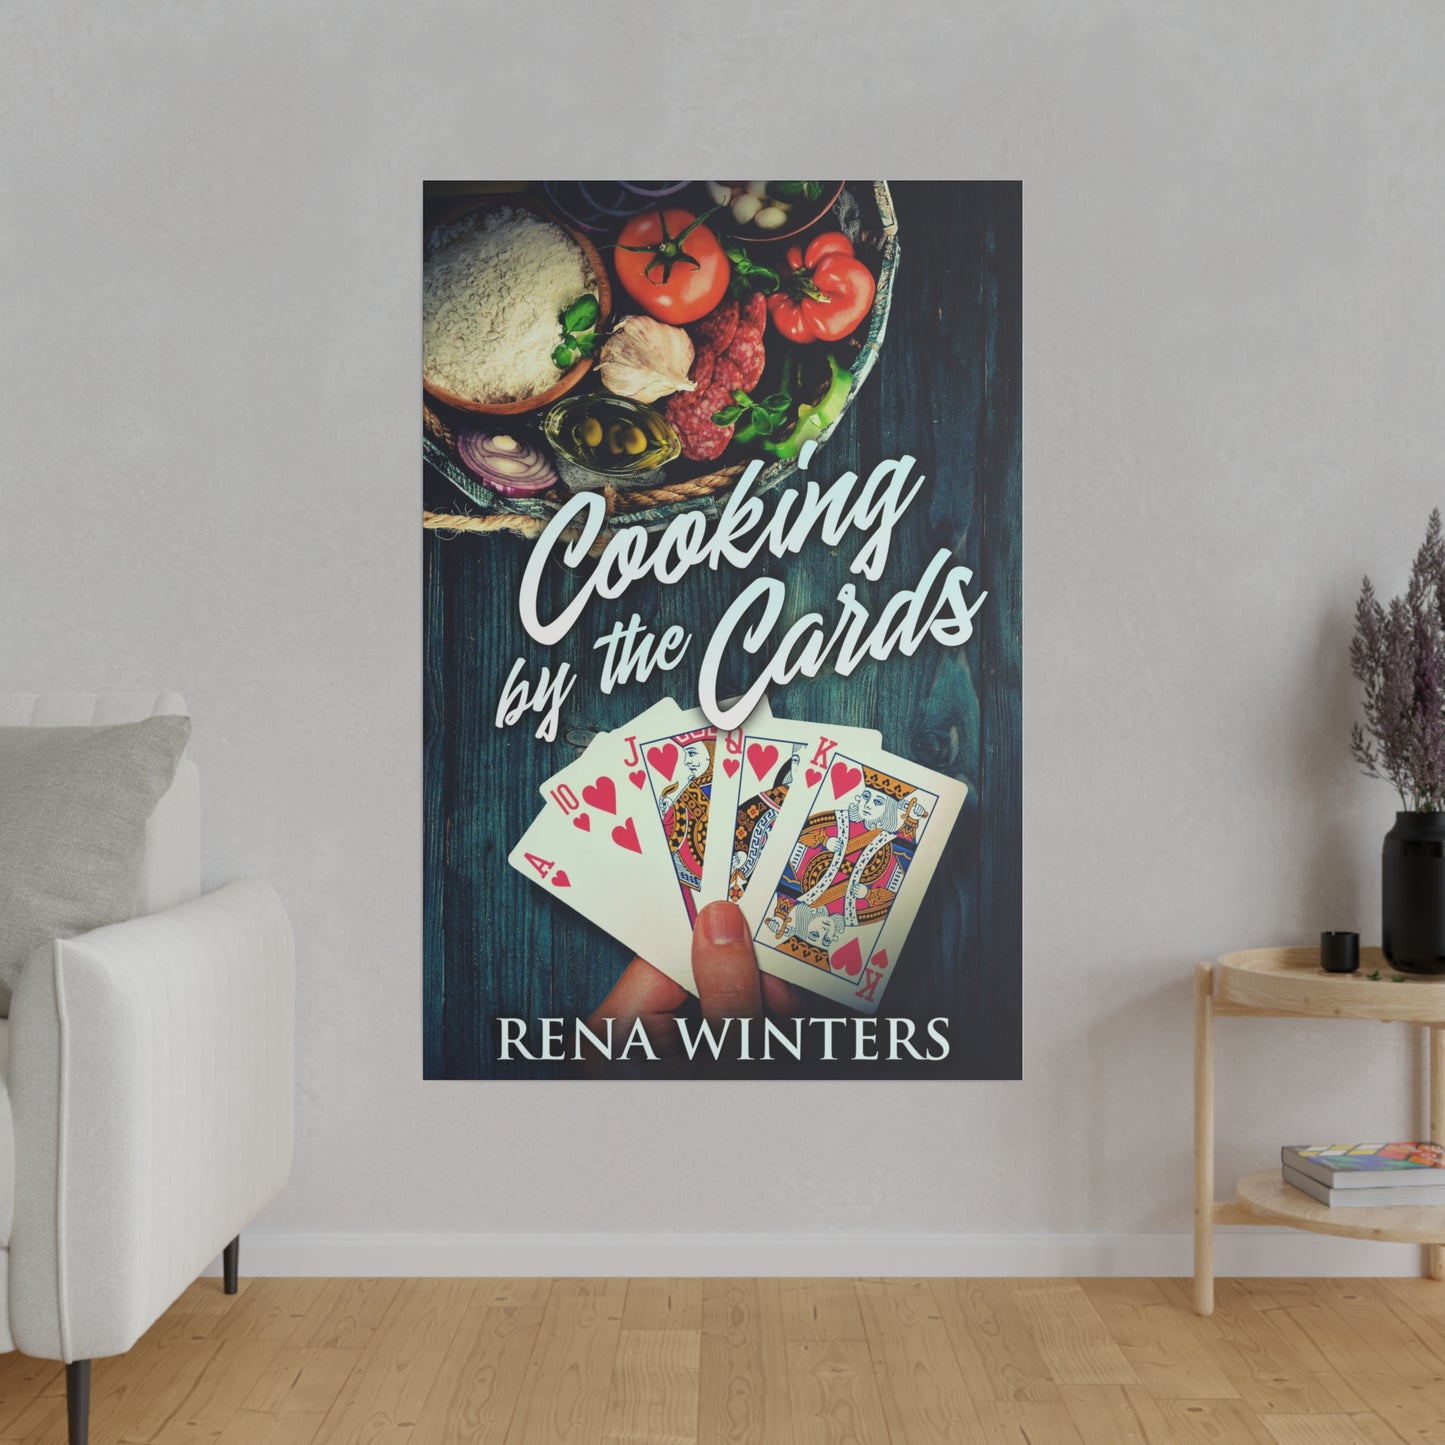 Cooking By The Cards - Canvas